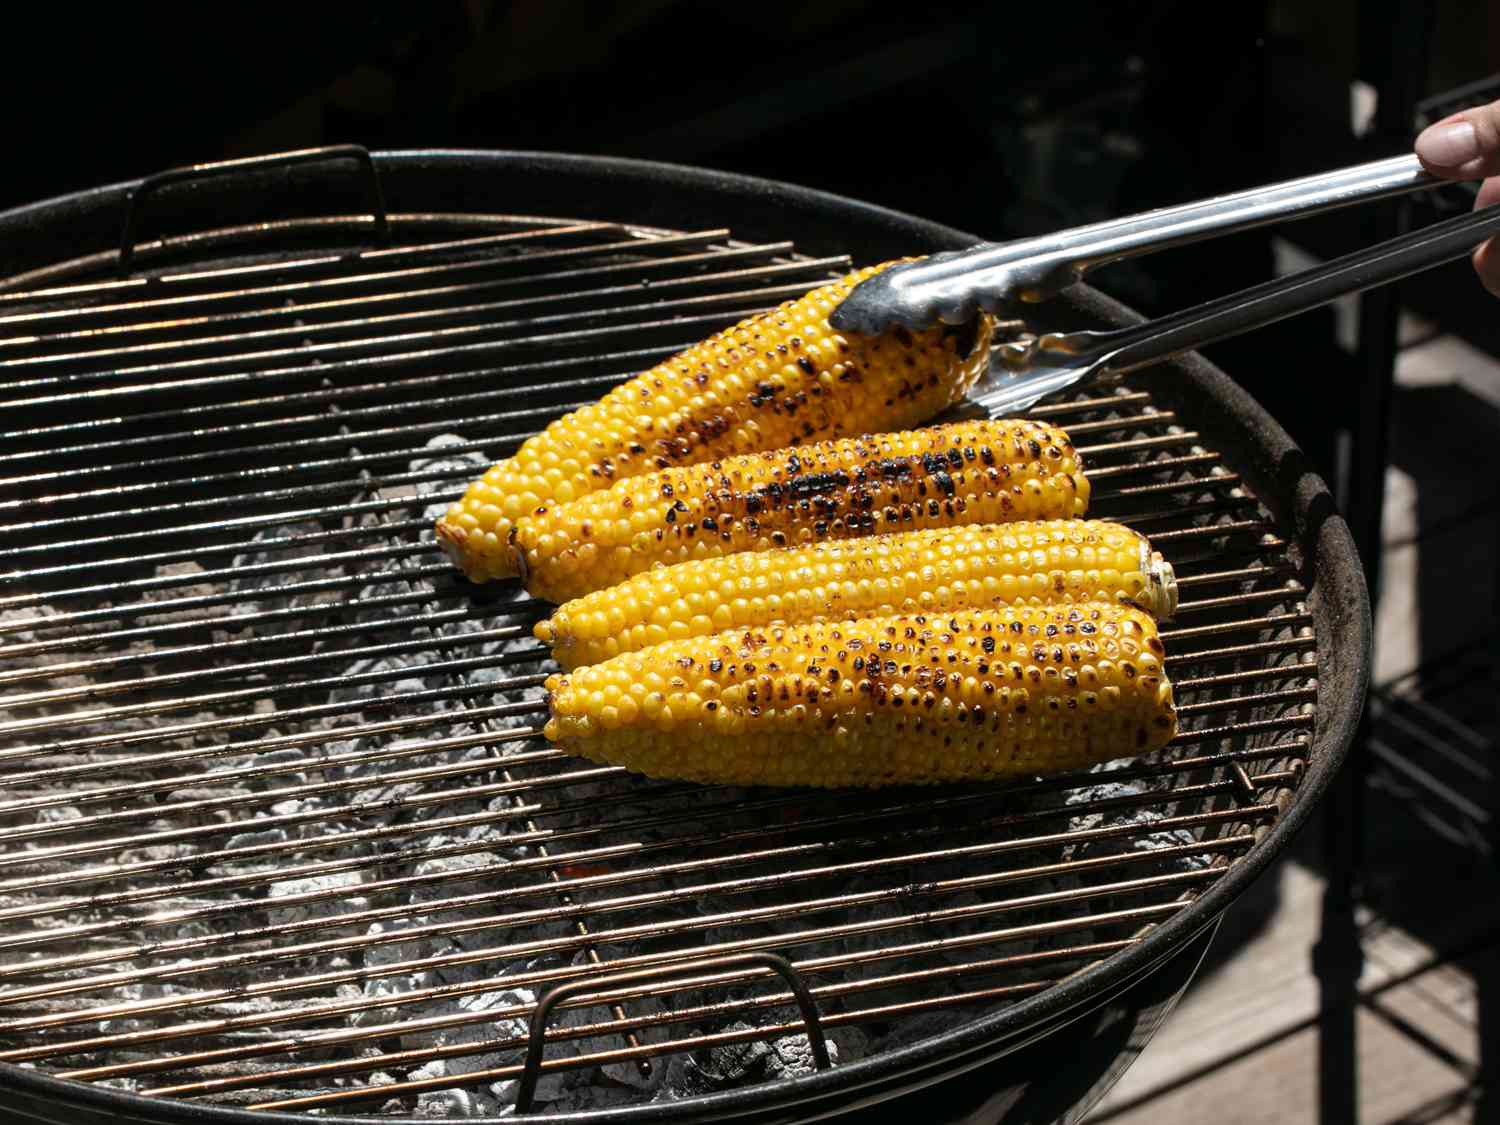 Grilling ears of corn for elotes